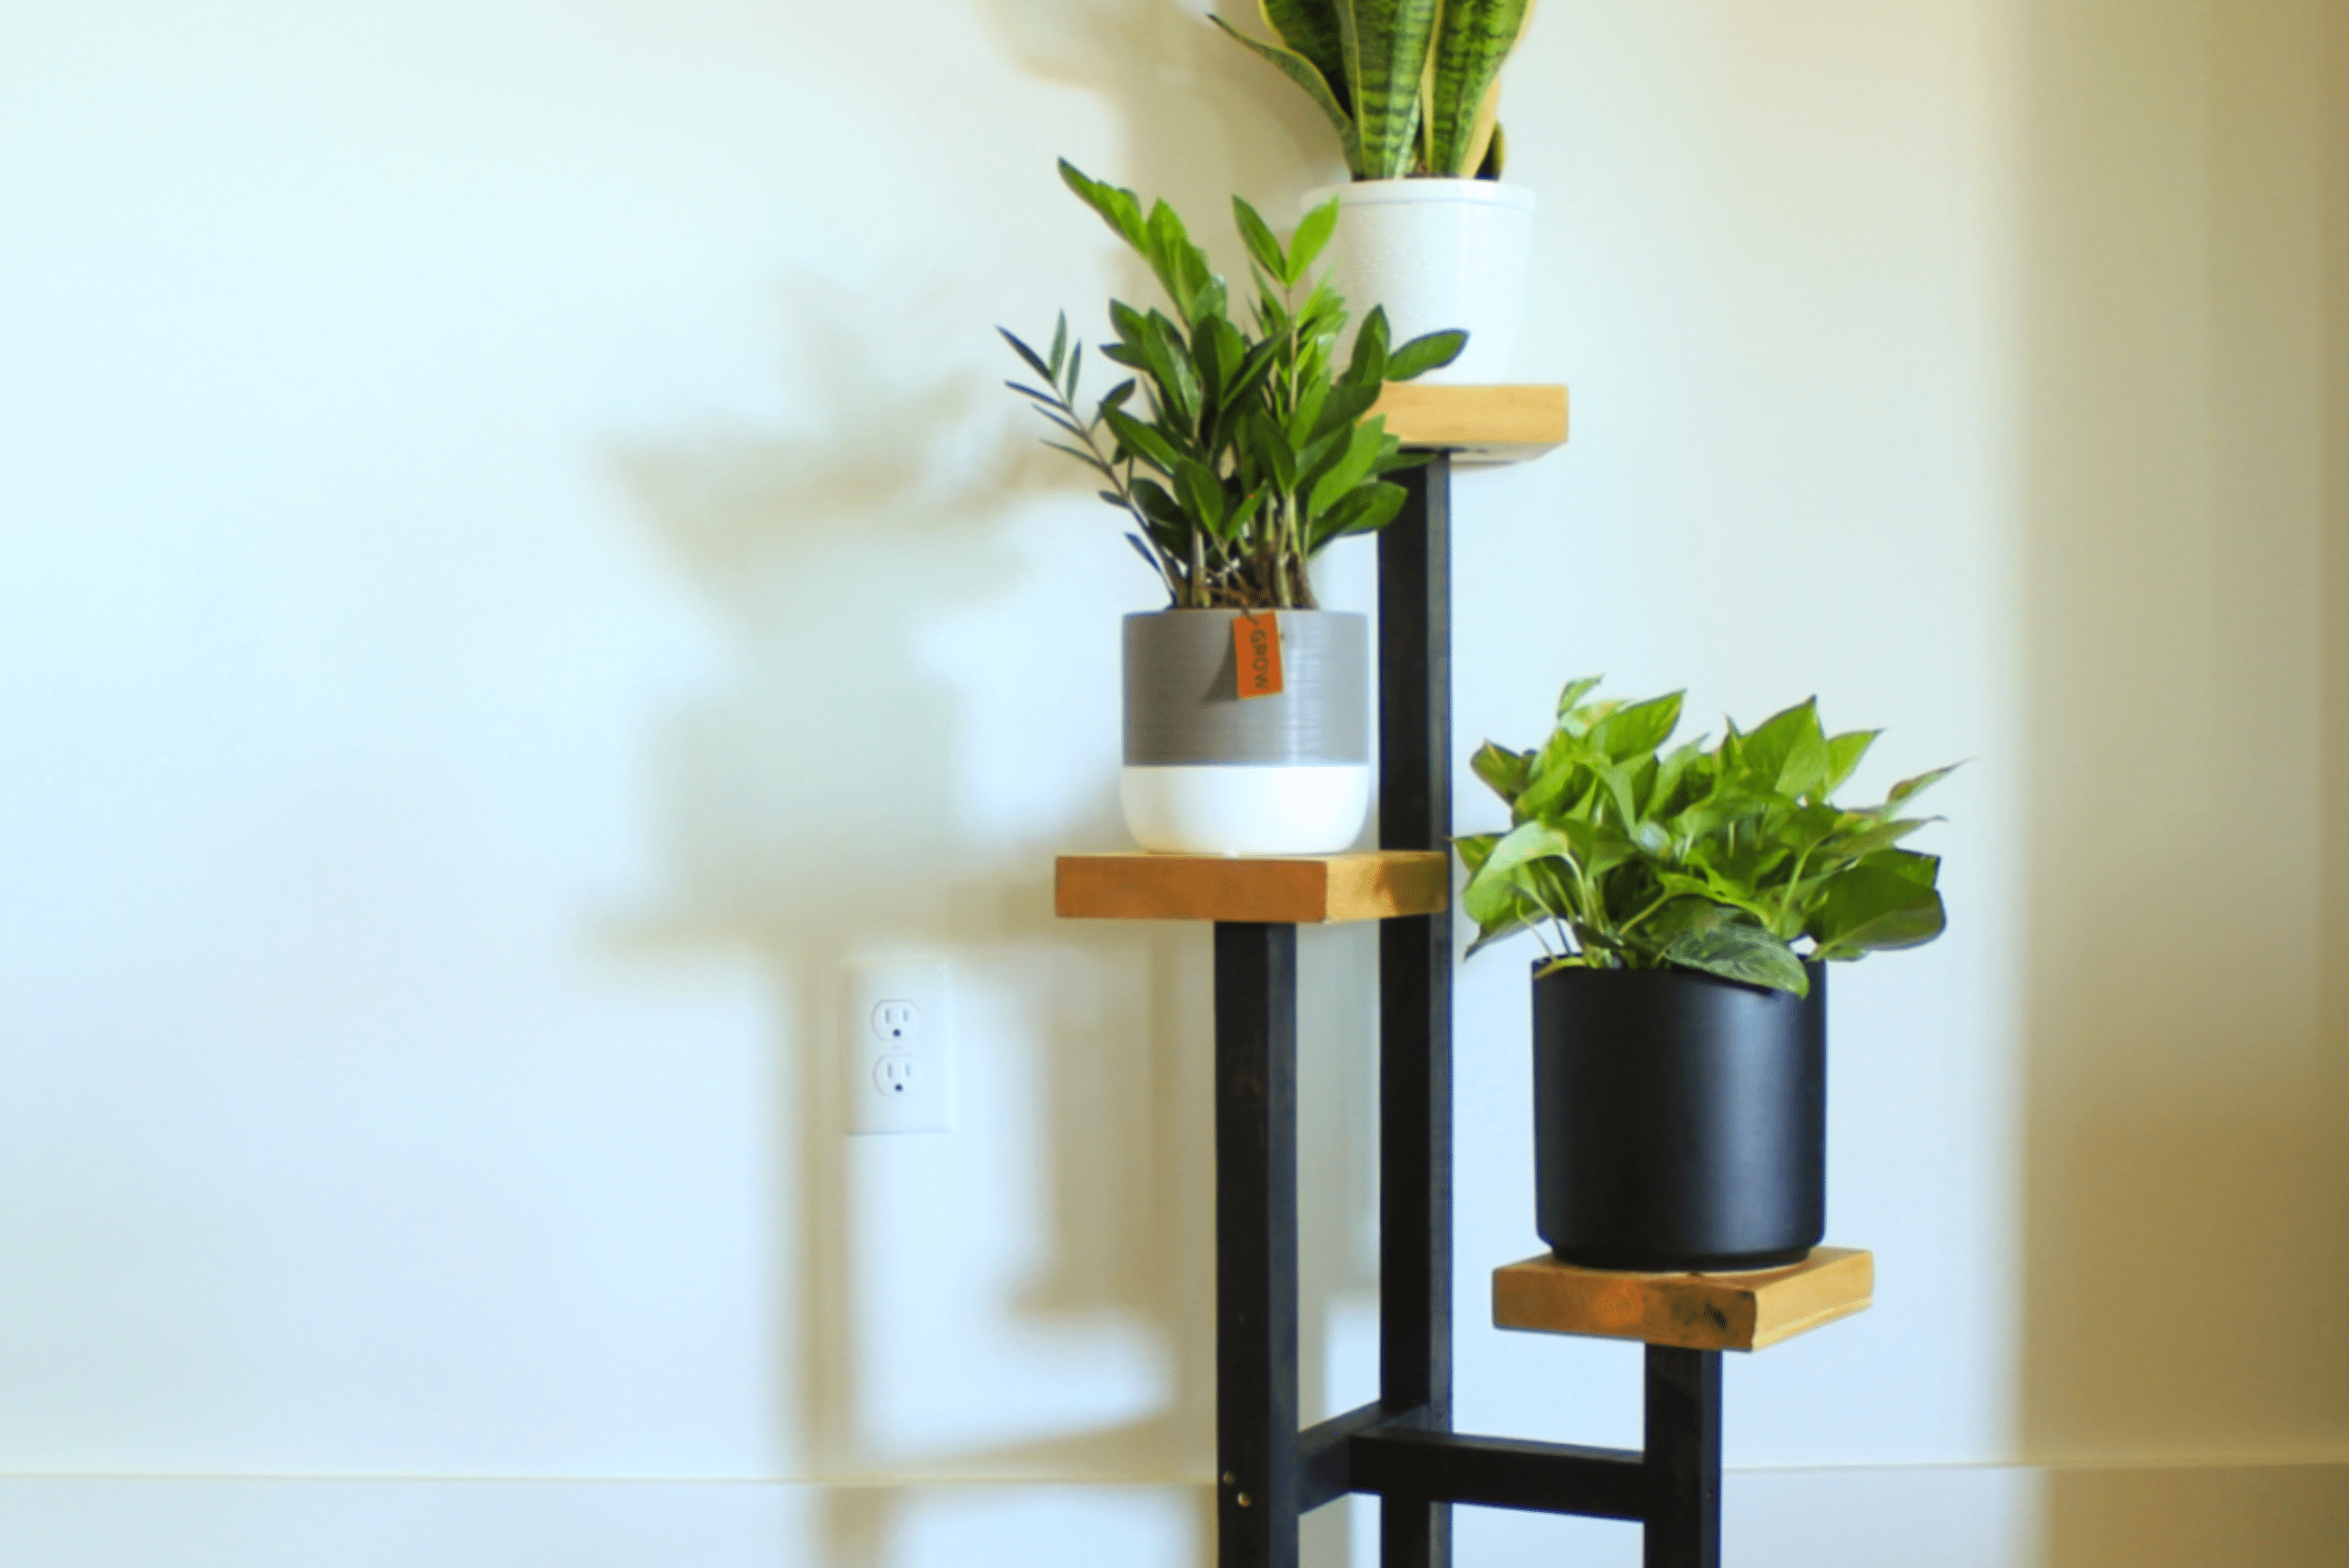 Black metal frame plant stand with wood platforms holding potted plants.